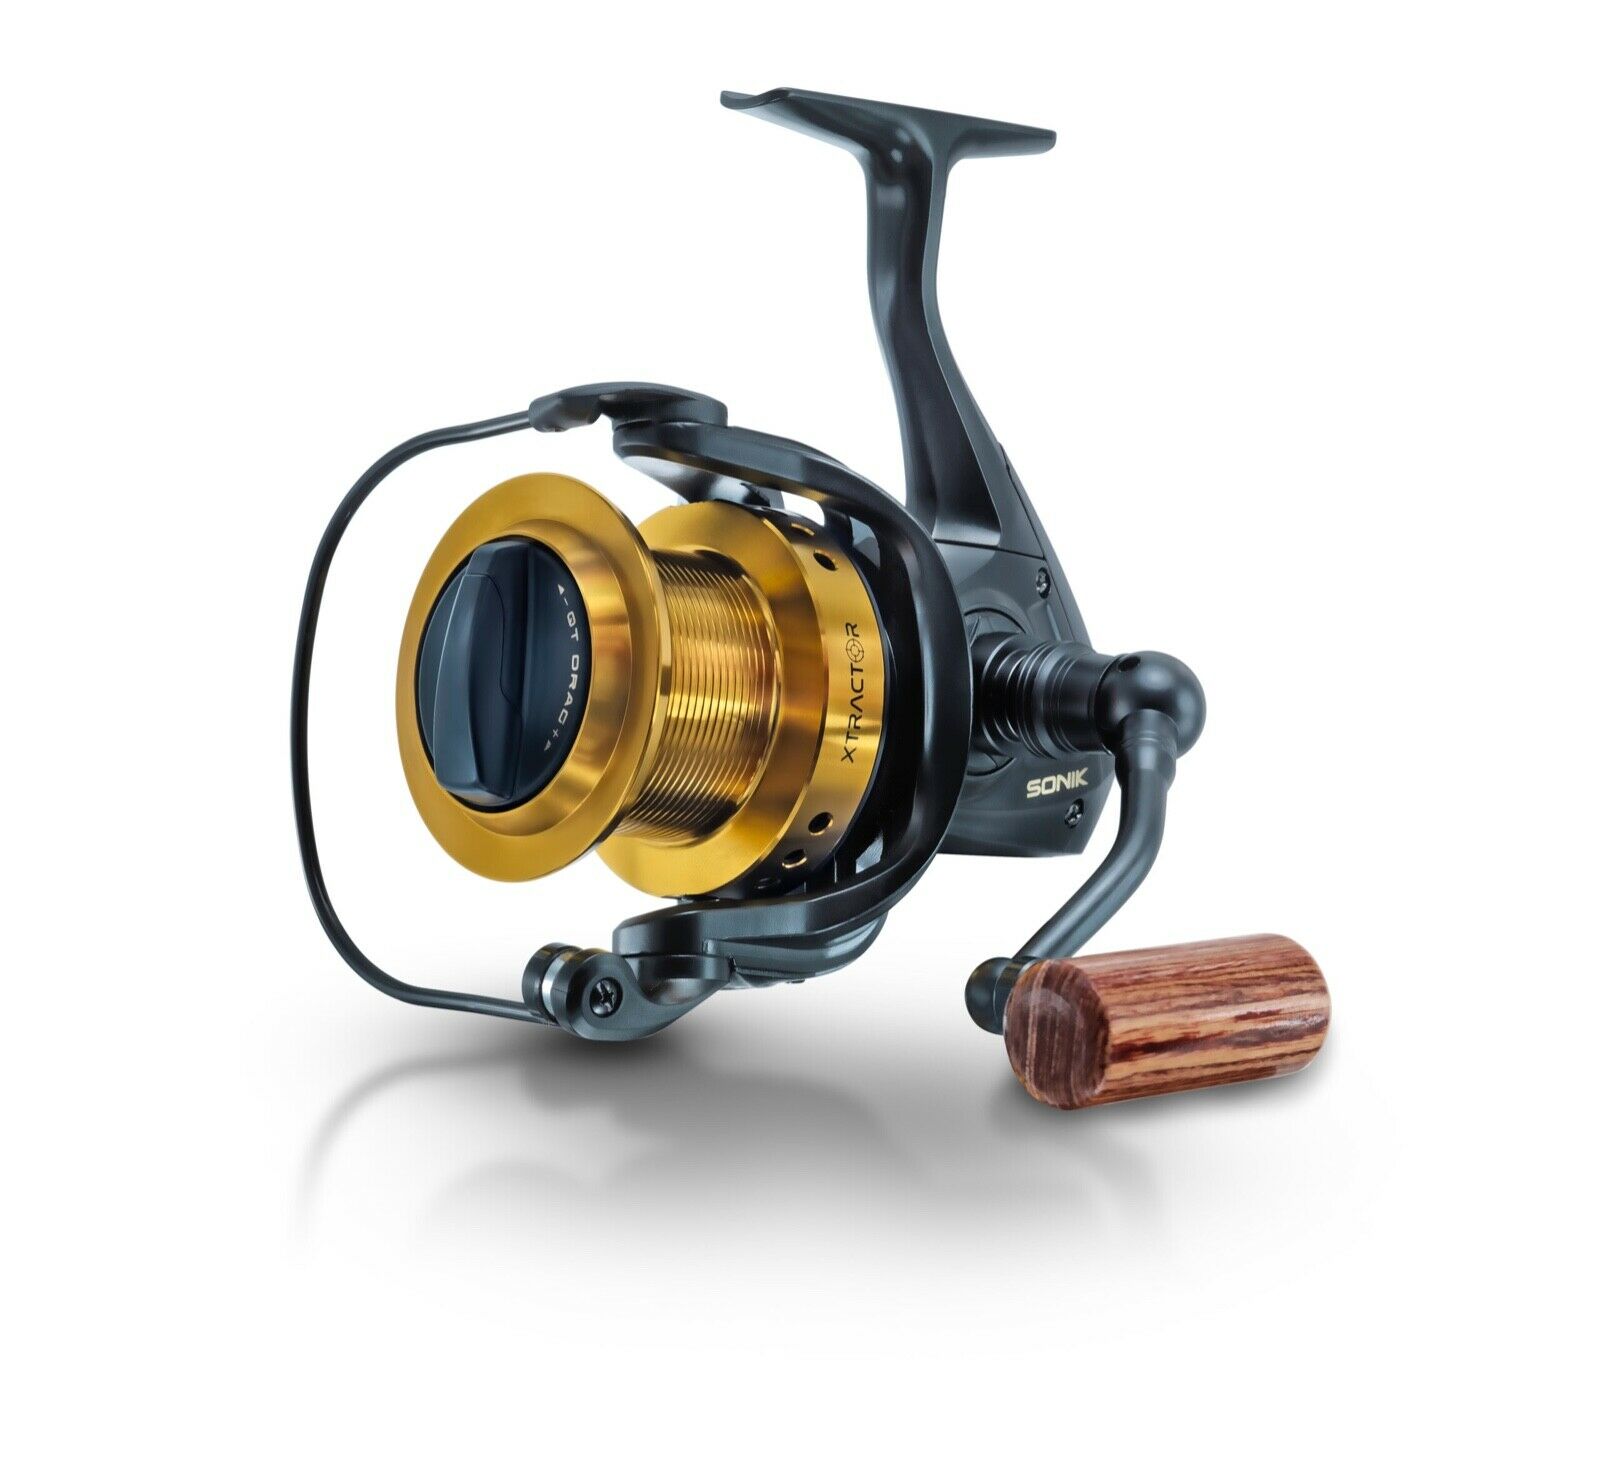 Sonik Xtractor 5000 Reel Gold Spool Edition – Glasgow Angling Centre